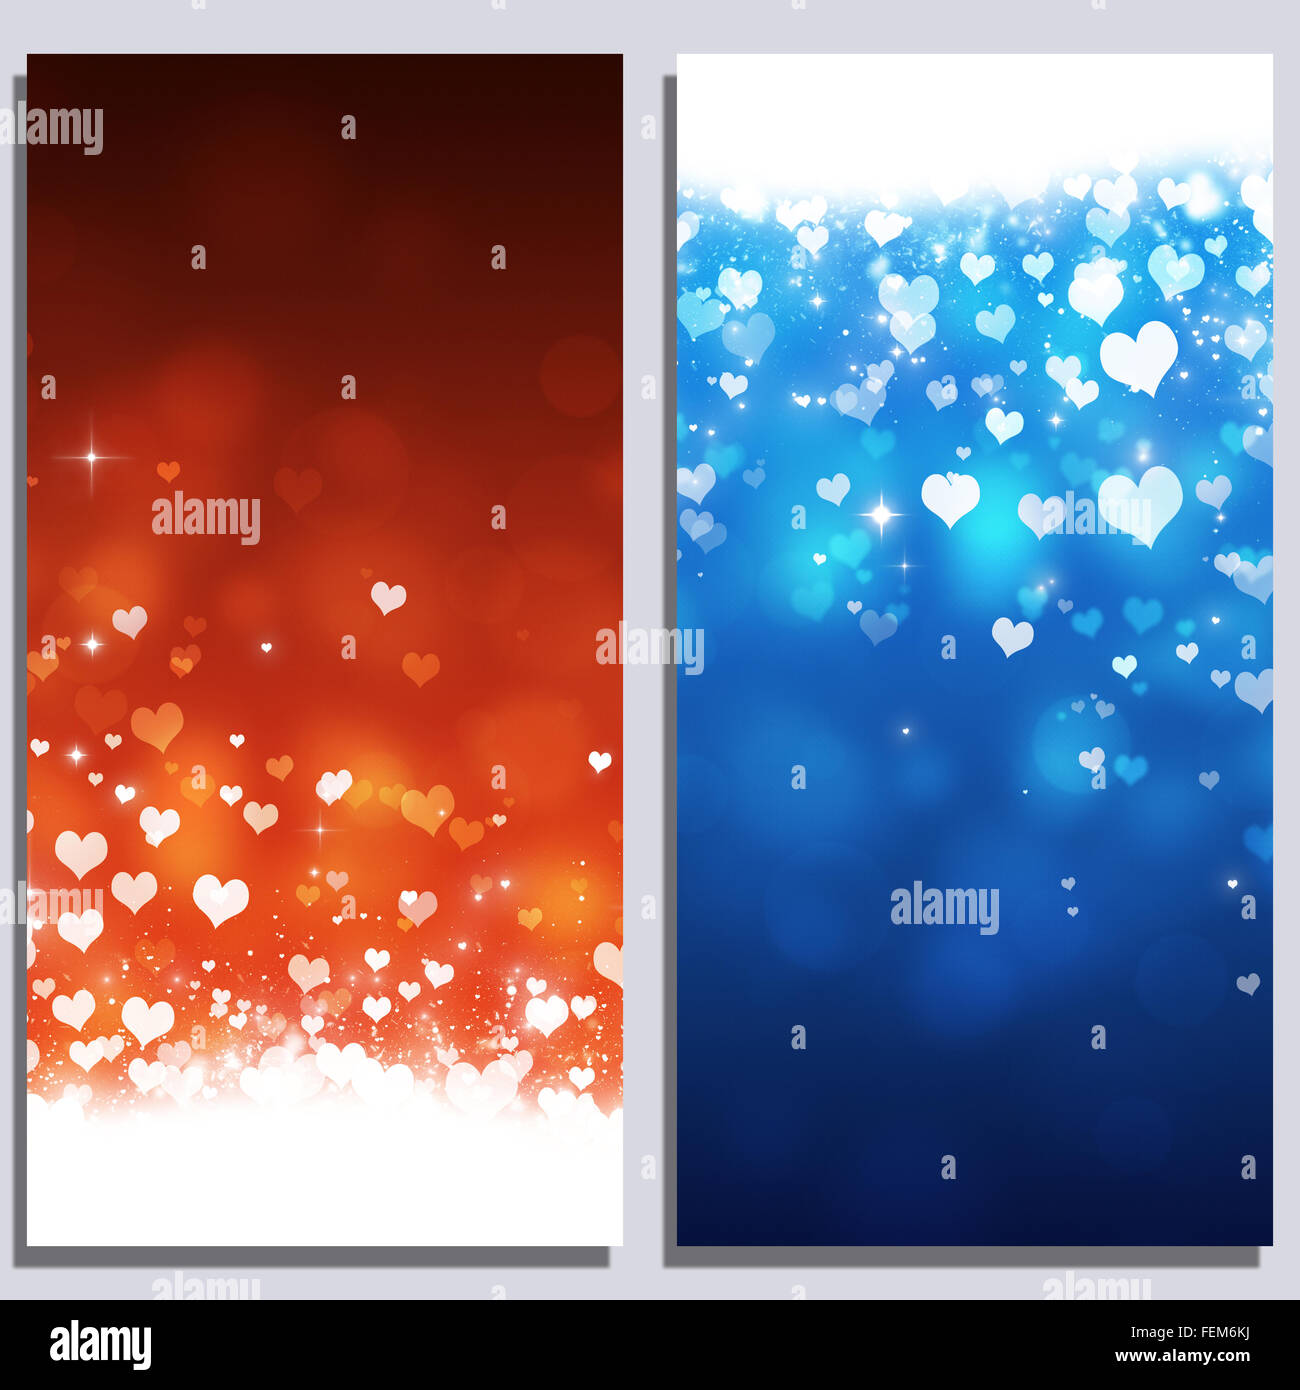 valentine holiday celebration banners with hearts and blurry lights Stock Photo